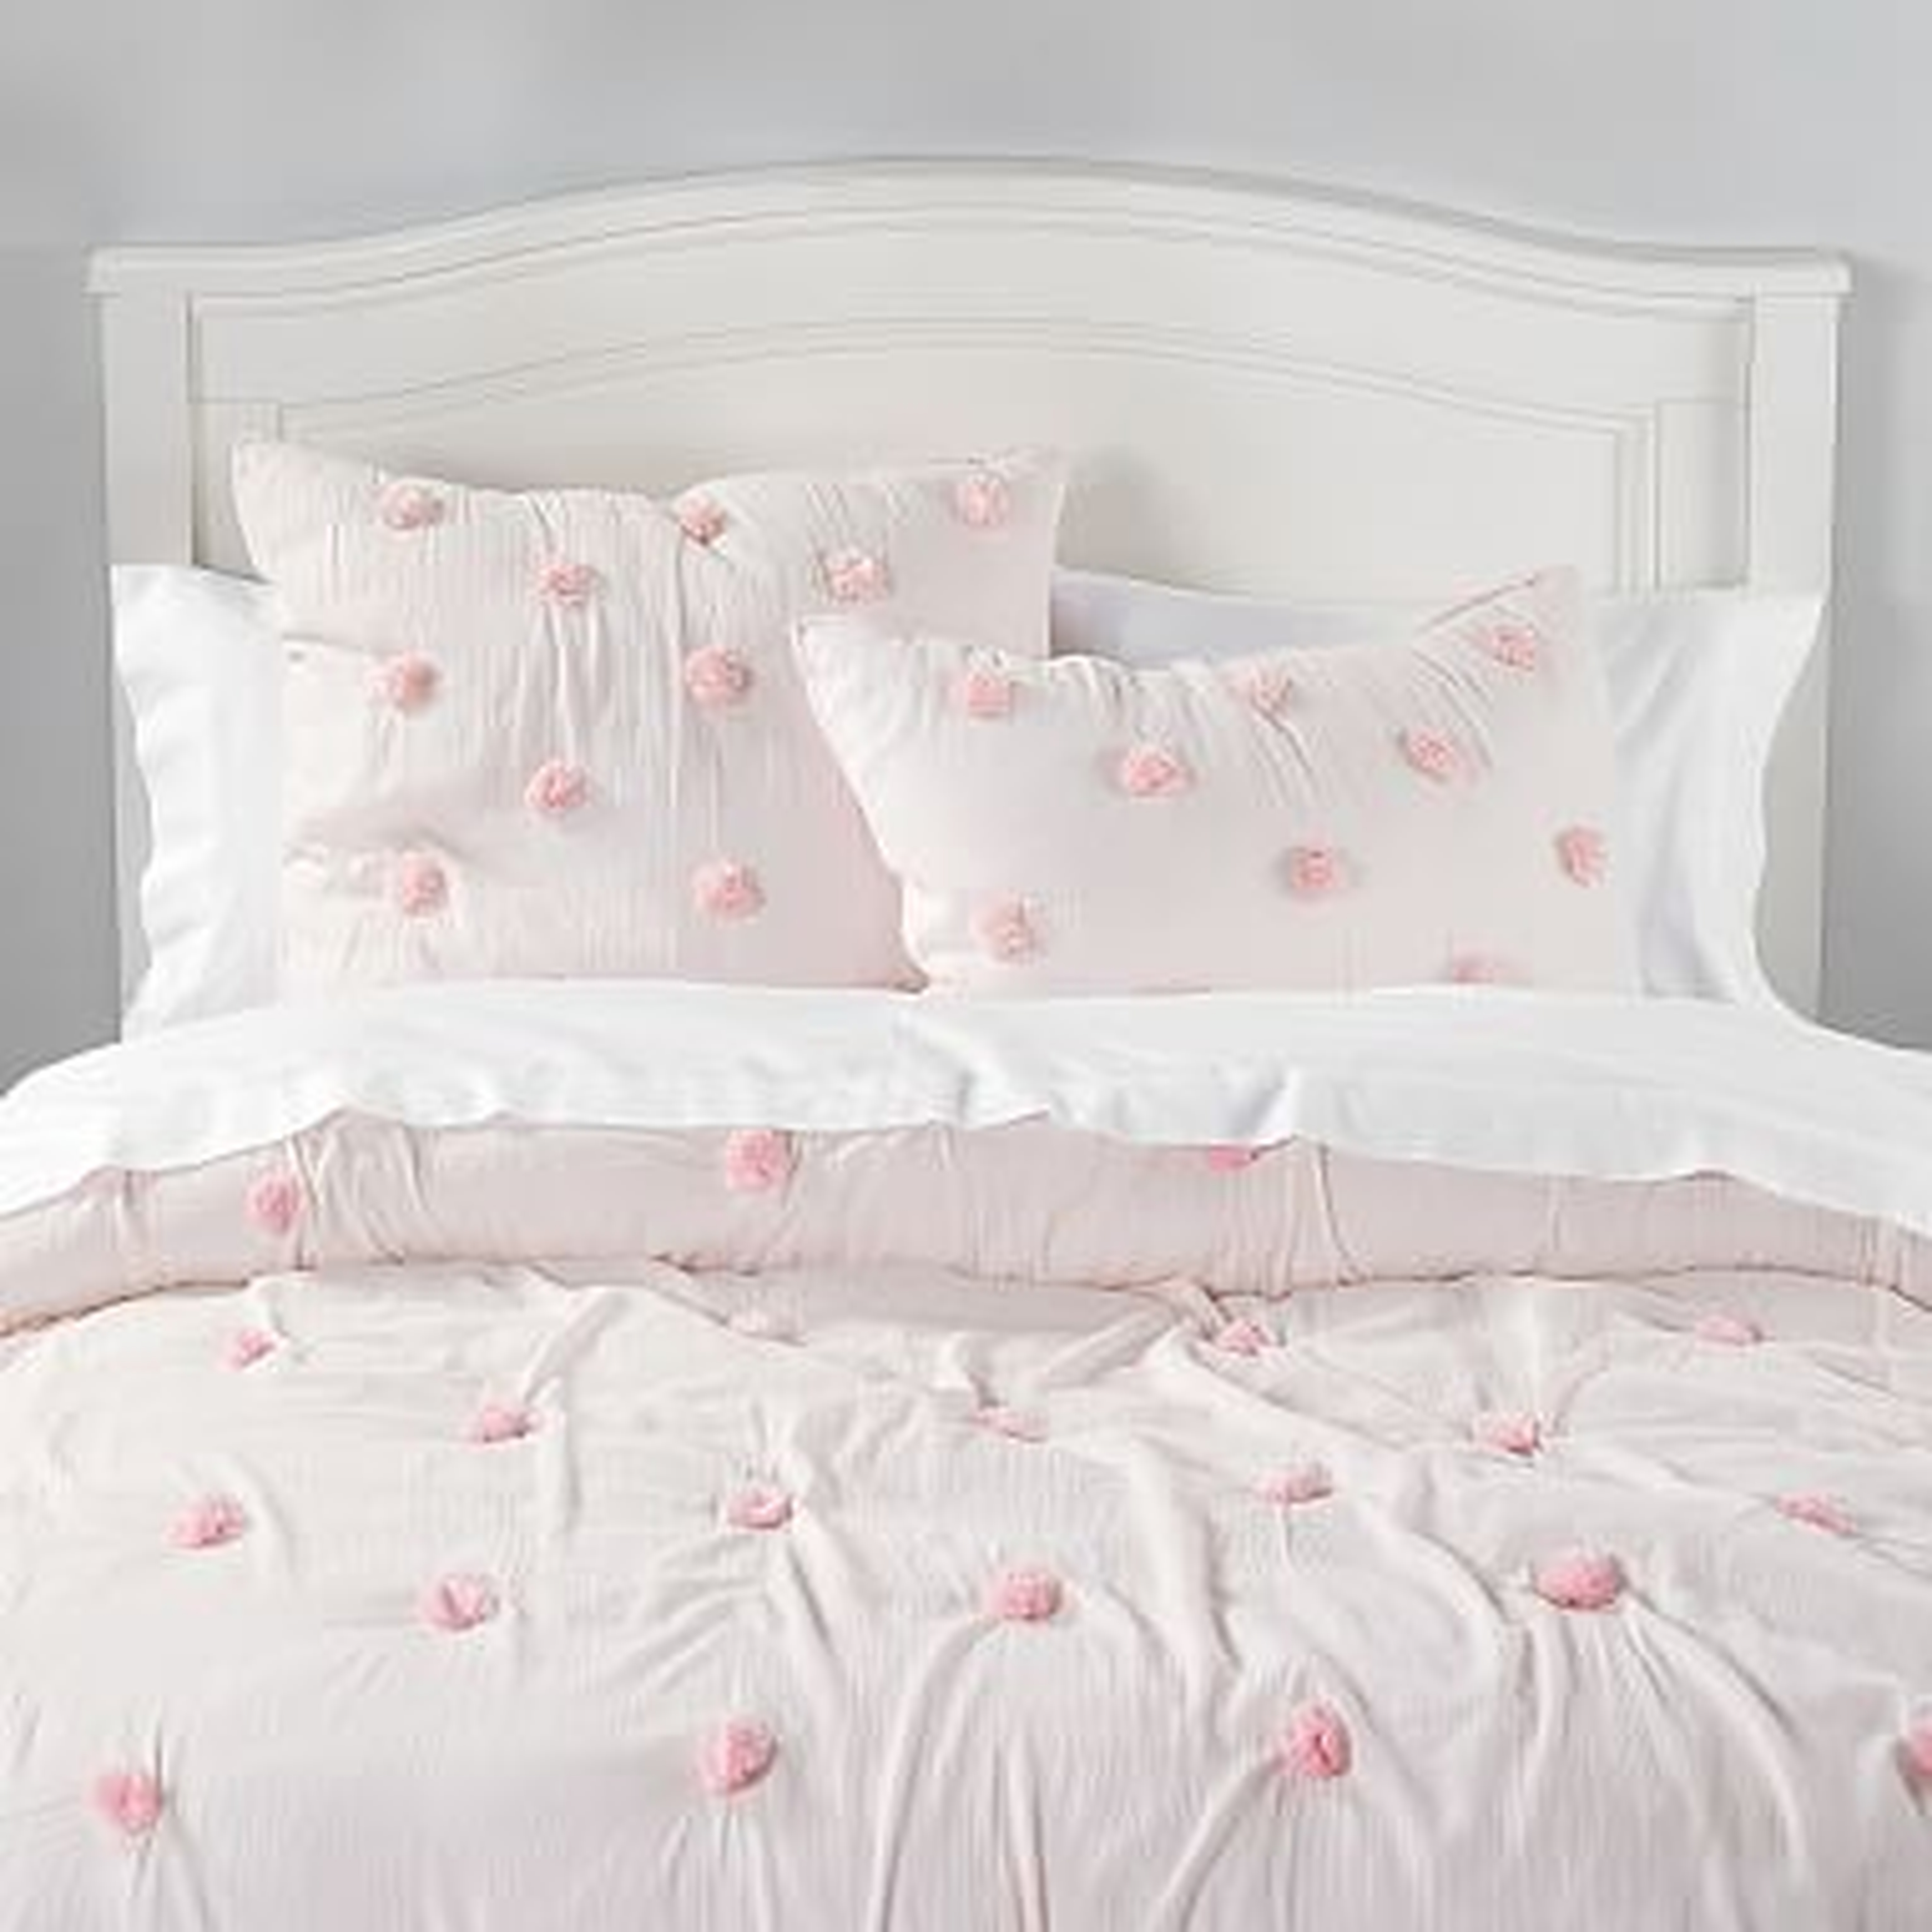 Crinkle Puff Quilt, Full/Queen, Powdered Blush - Pottery Barn Teen